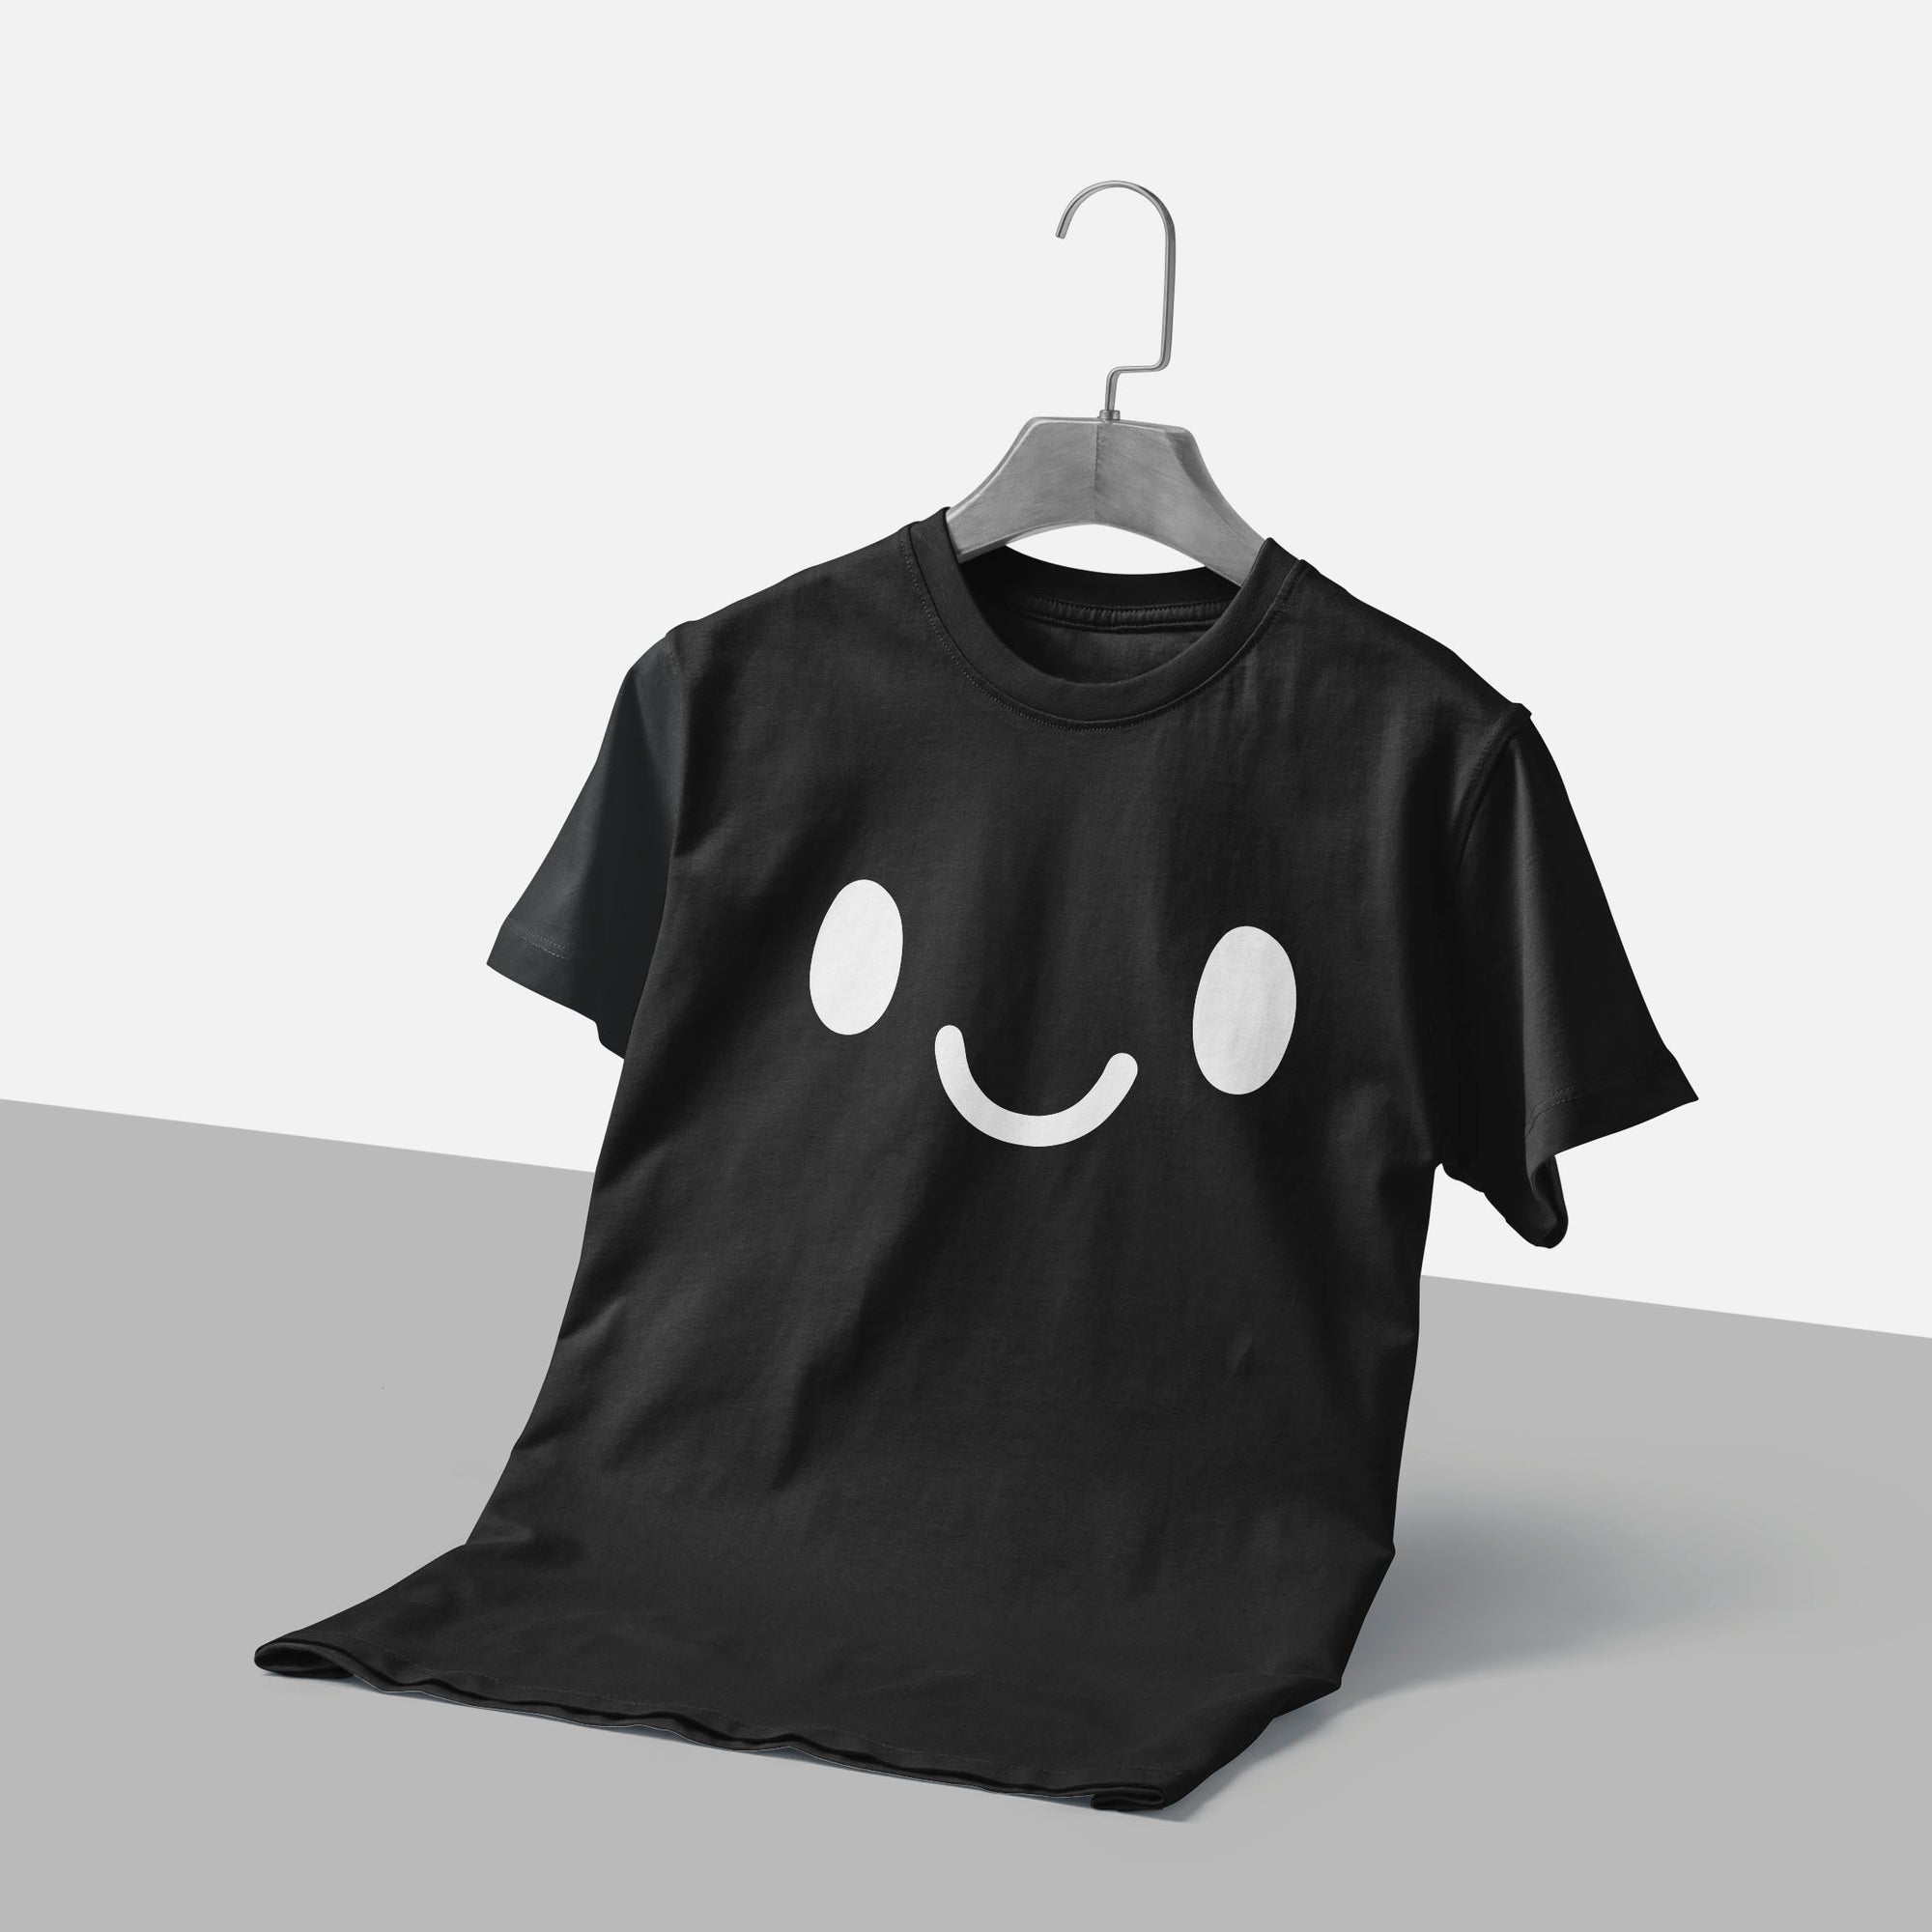 Classic Smiley Face T-Shirt